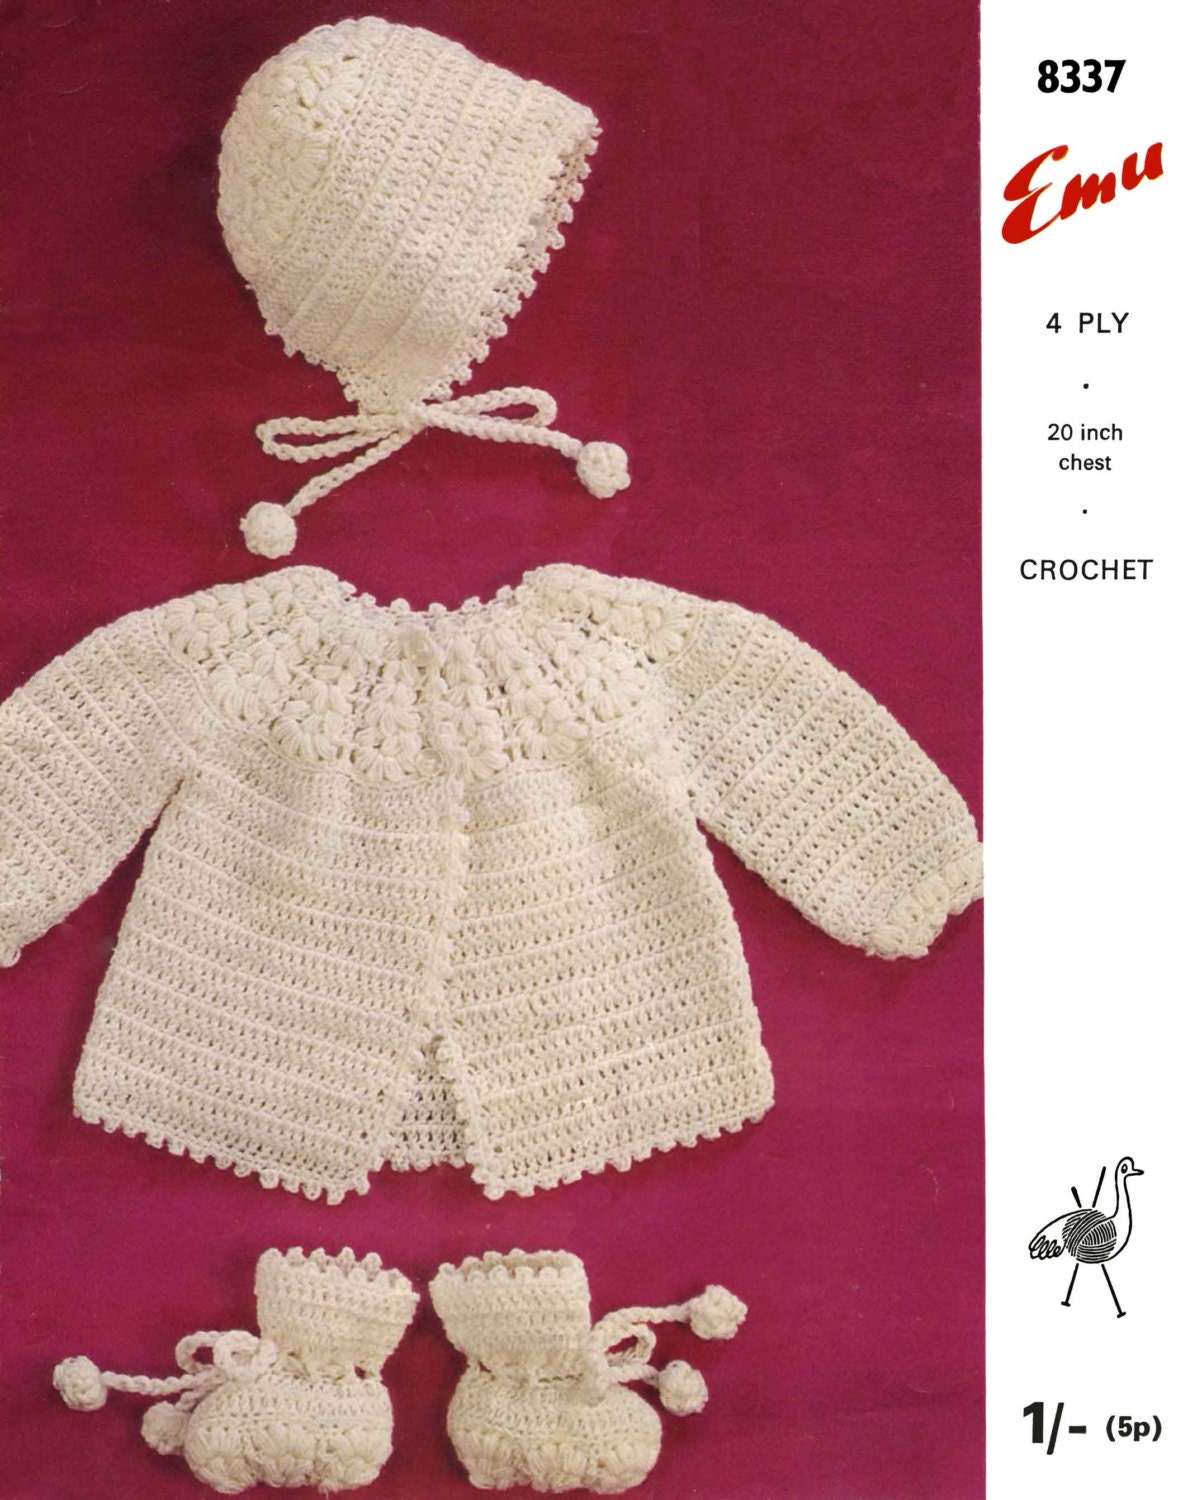 Baby Coat / Cardigan, Bonnet and Bootees, 20" Chest, 4ply, 70s Crochet Pattern, Emu 8337